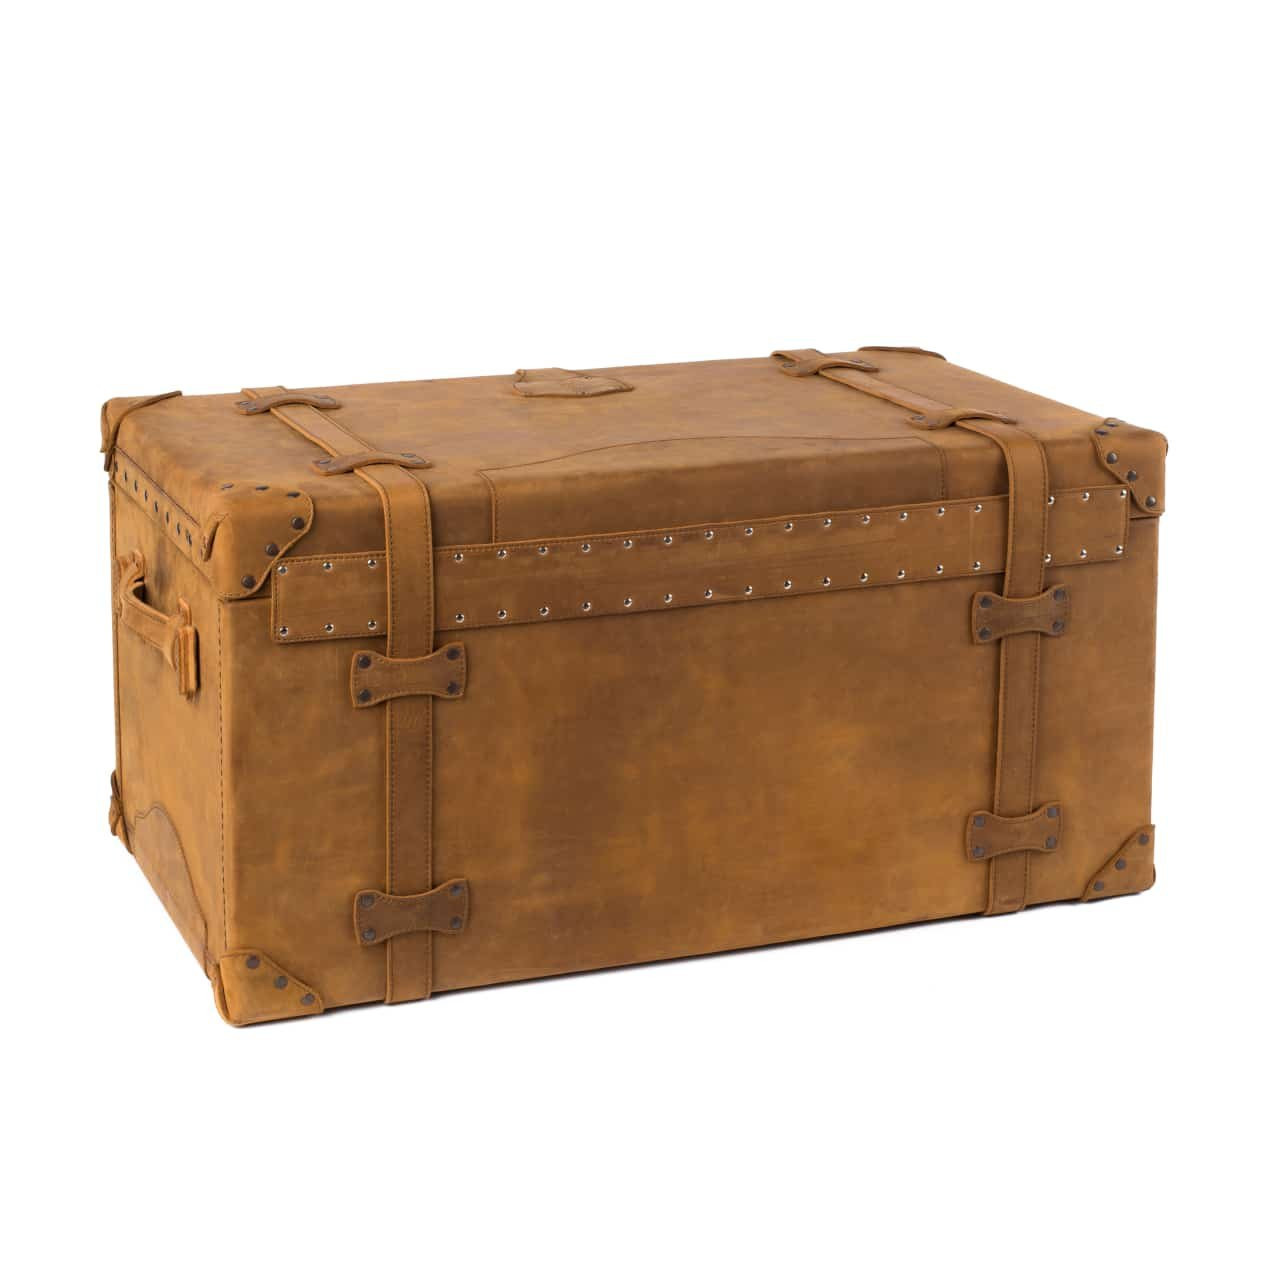 Jumbo Vintage Steamer Trunk  Second Use Building Materials and